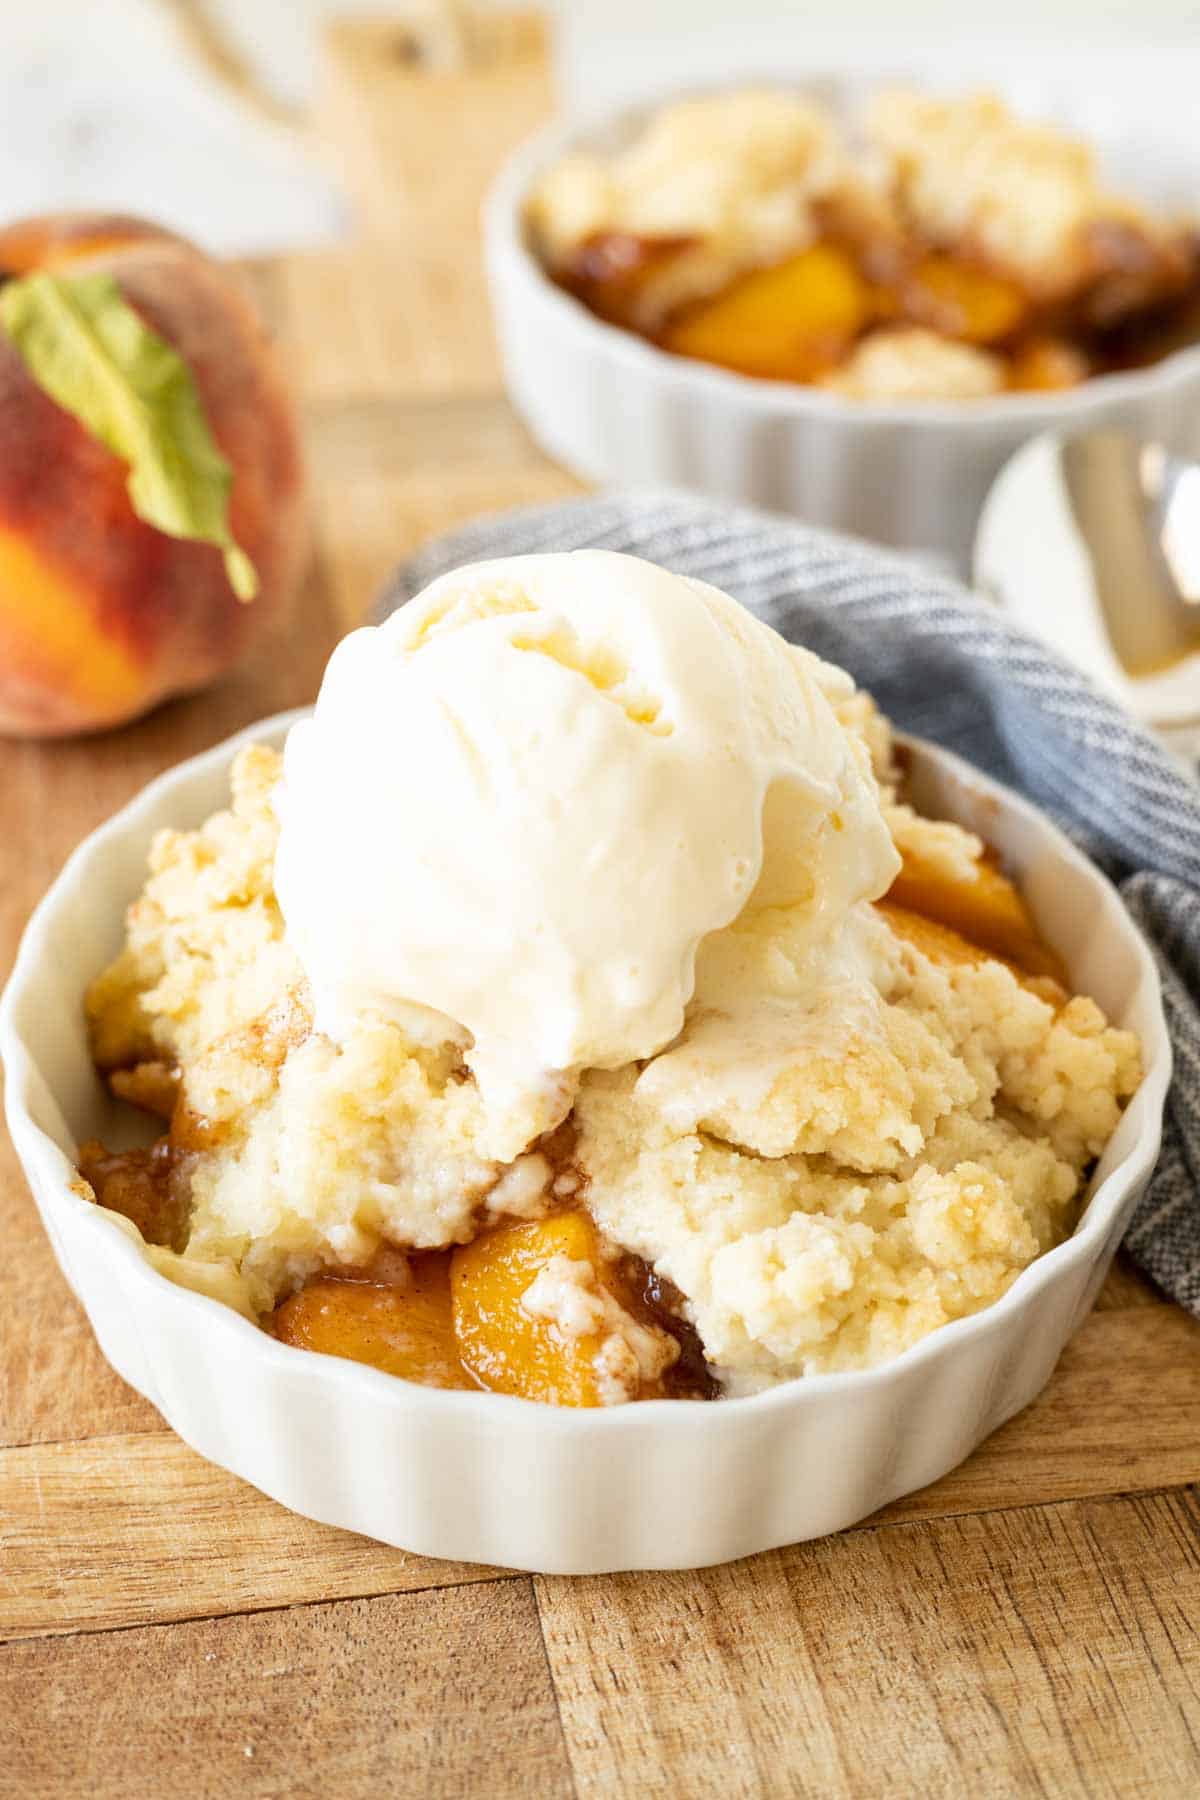 A bowl of peach cobbler with biscuit topping and vanilla ice cream.